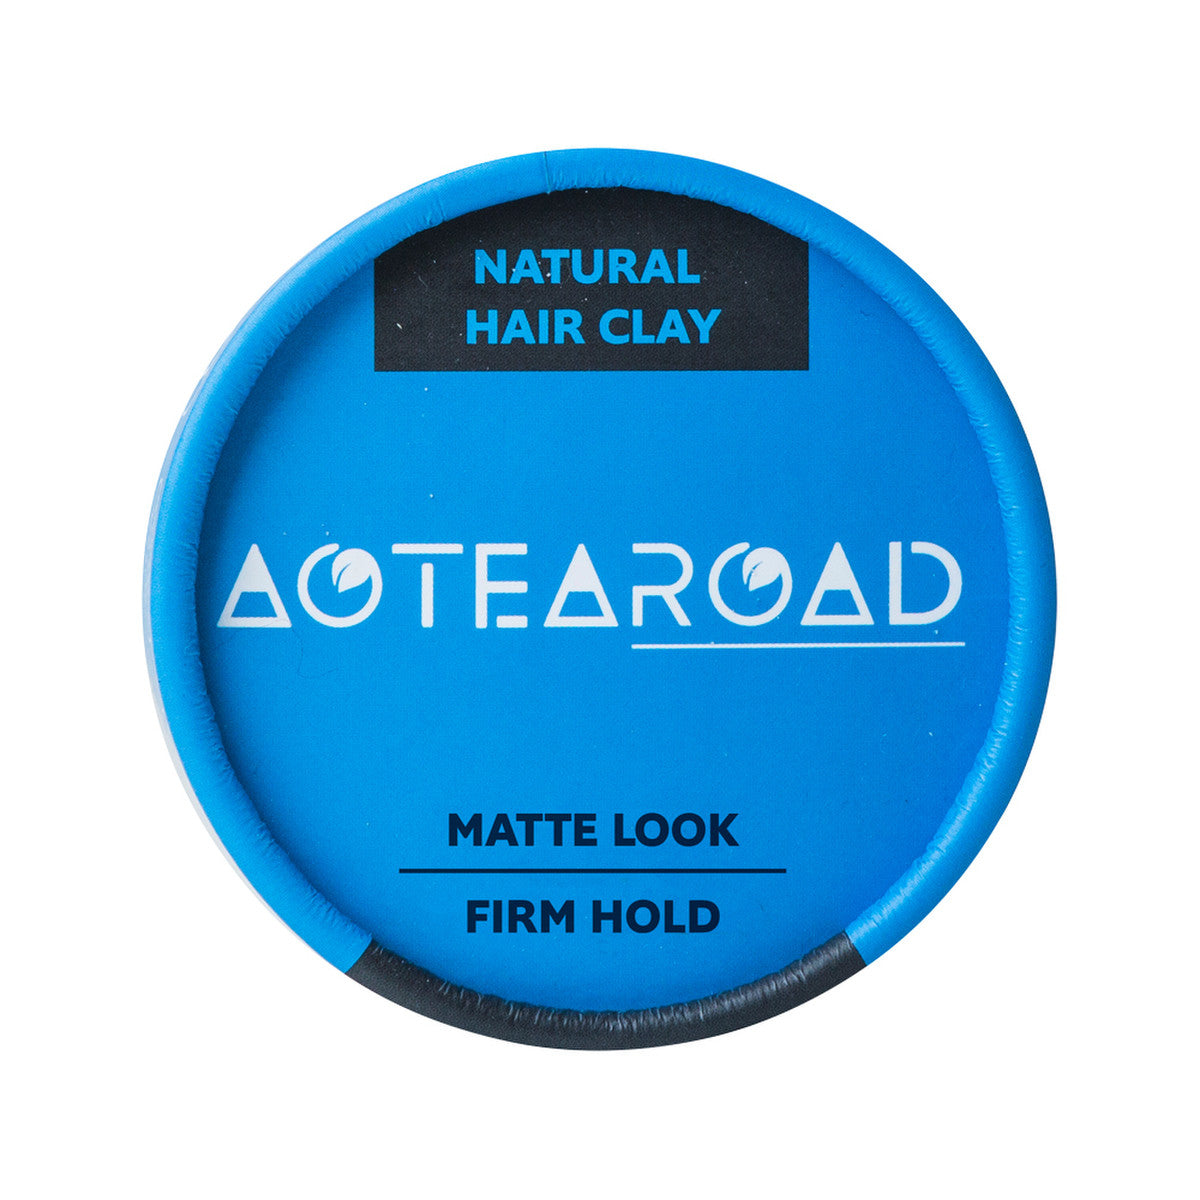 Aotearoad Natural Hair Clay 65g, Firm Hold & Matte Look